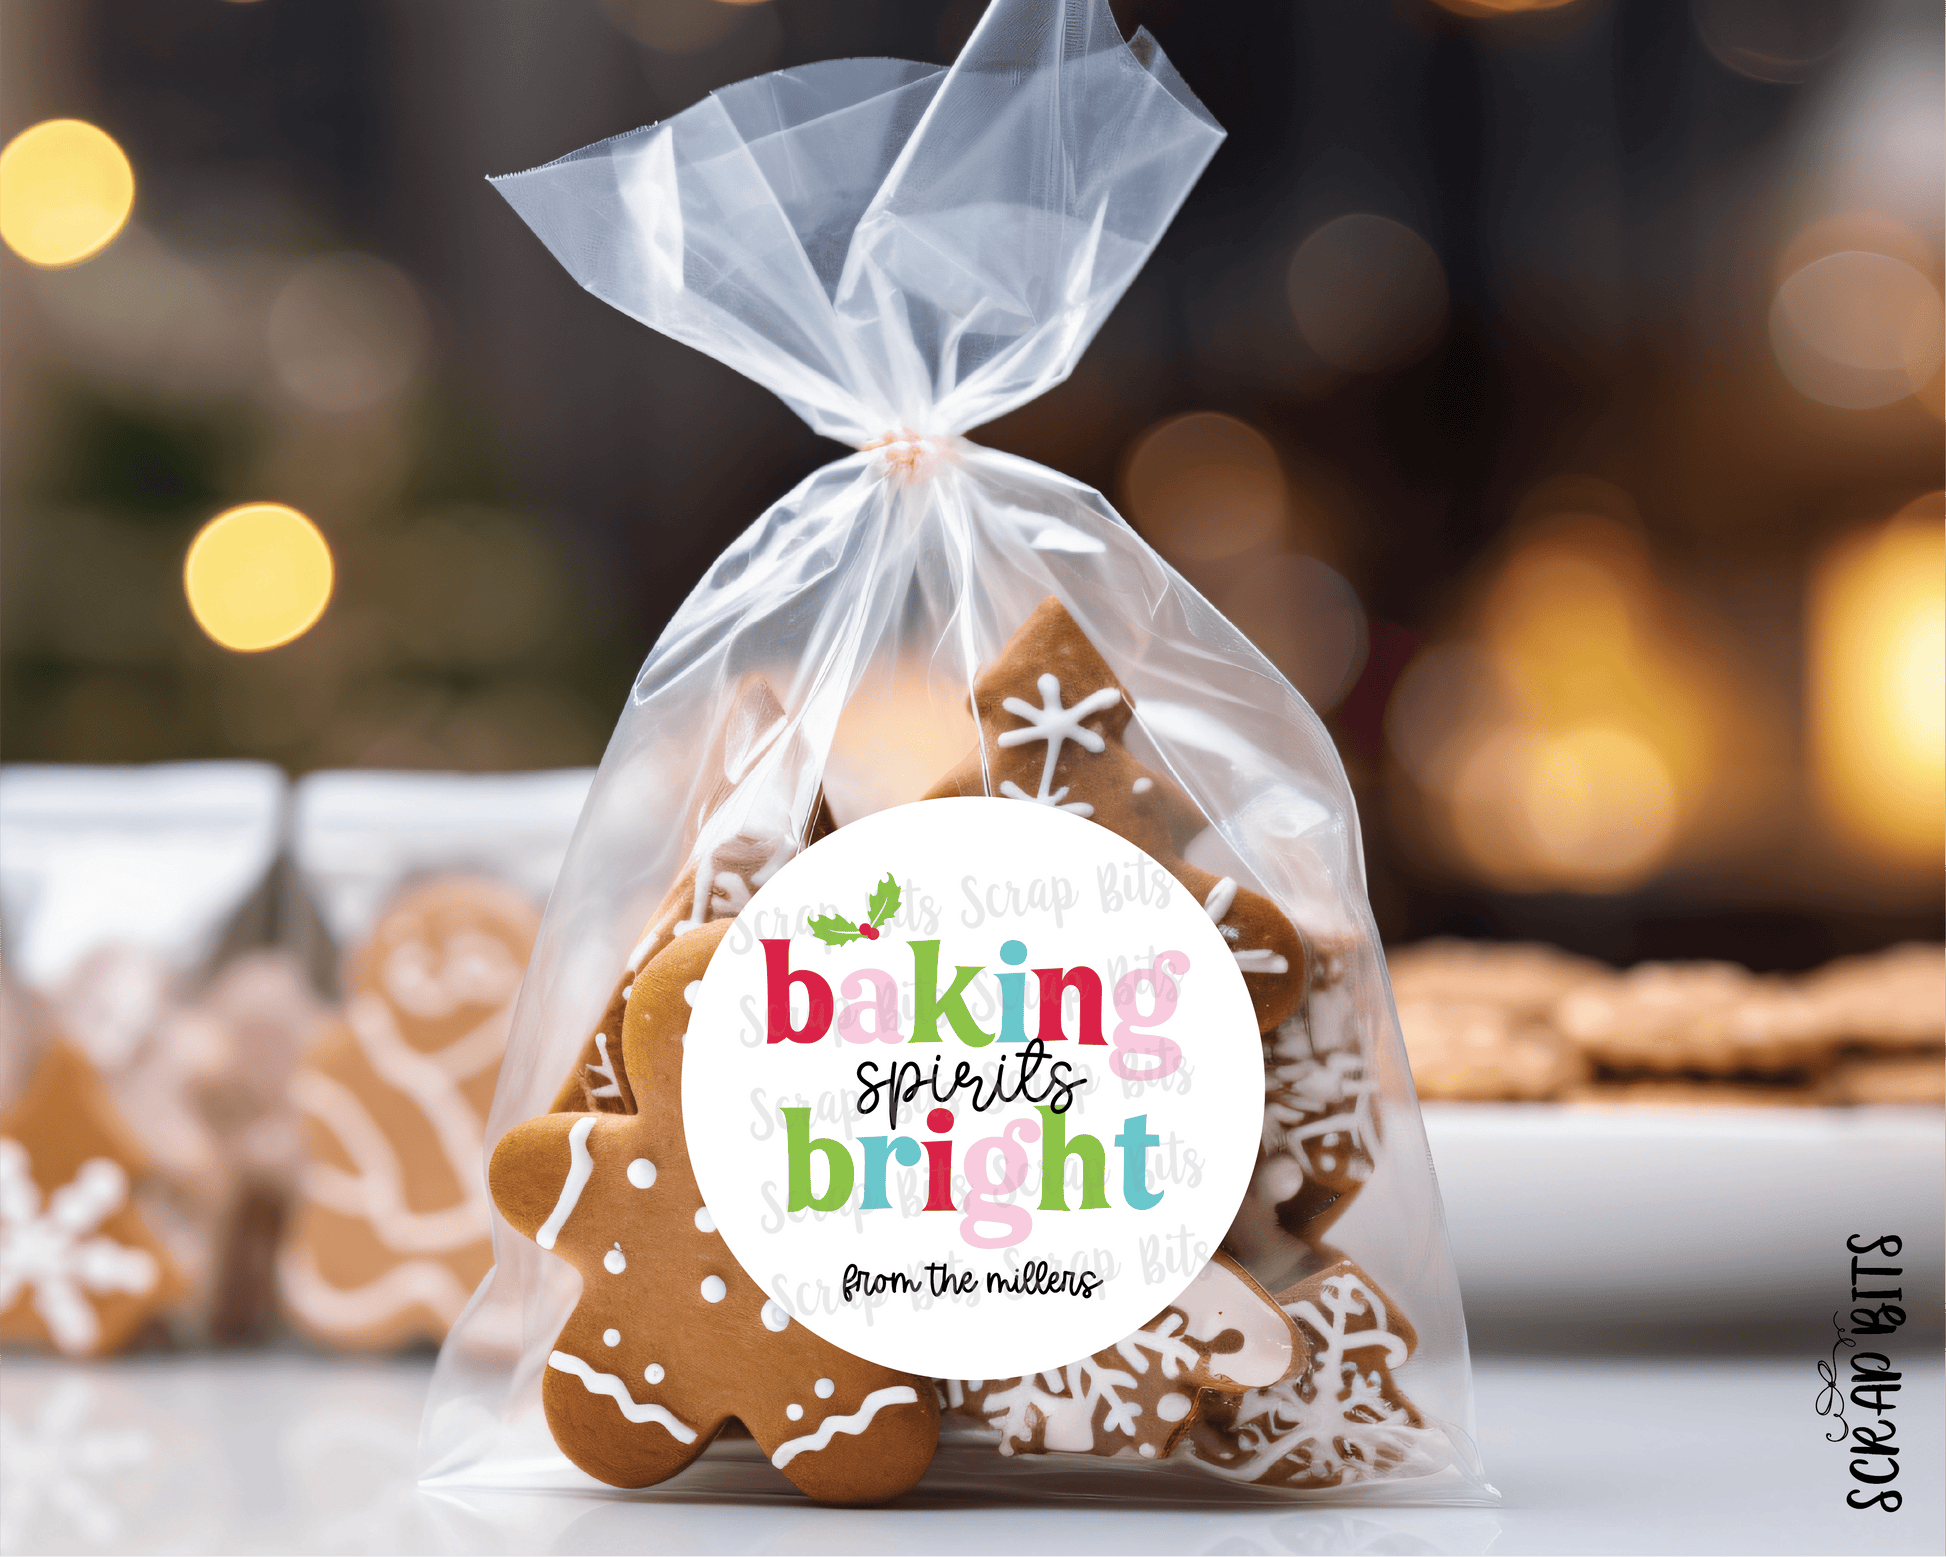 Baking Spirits Bright Stickers, Bright Funky Lettering . Christmas Baking Labels or Tags - Scrap Bits